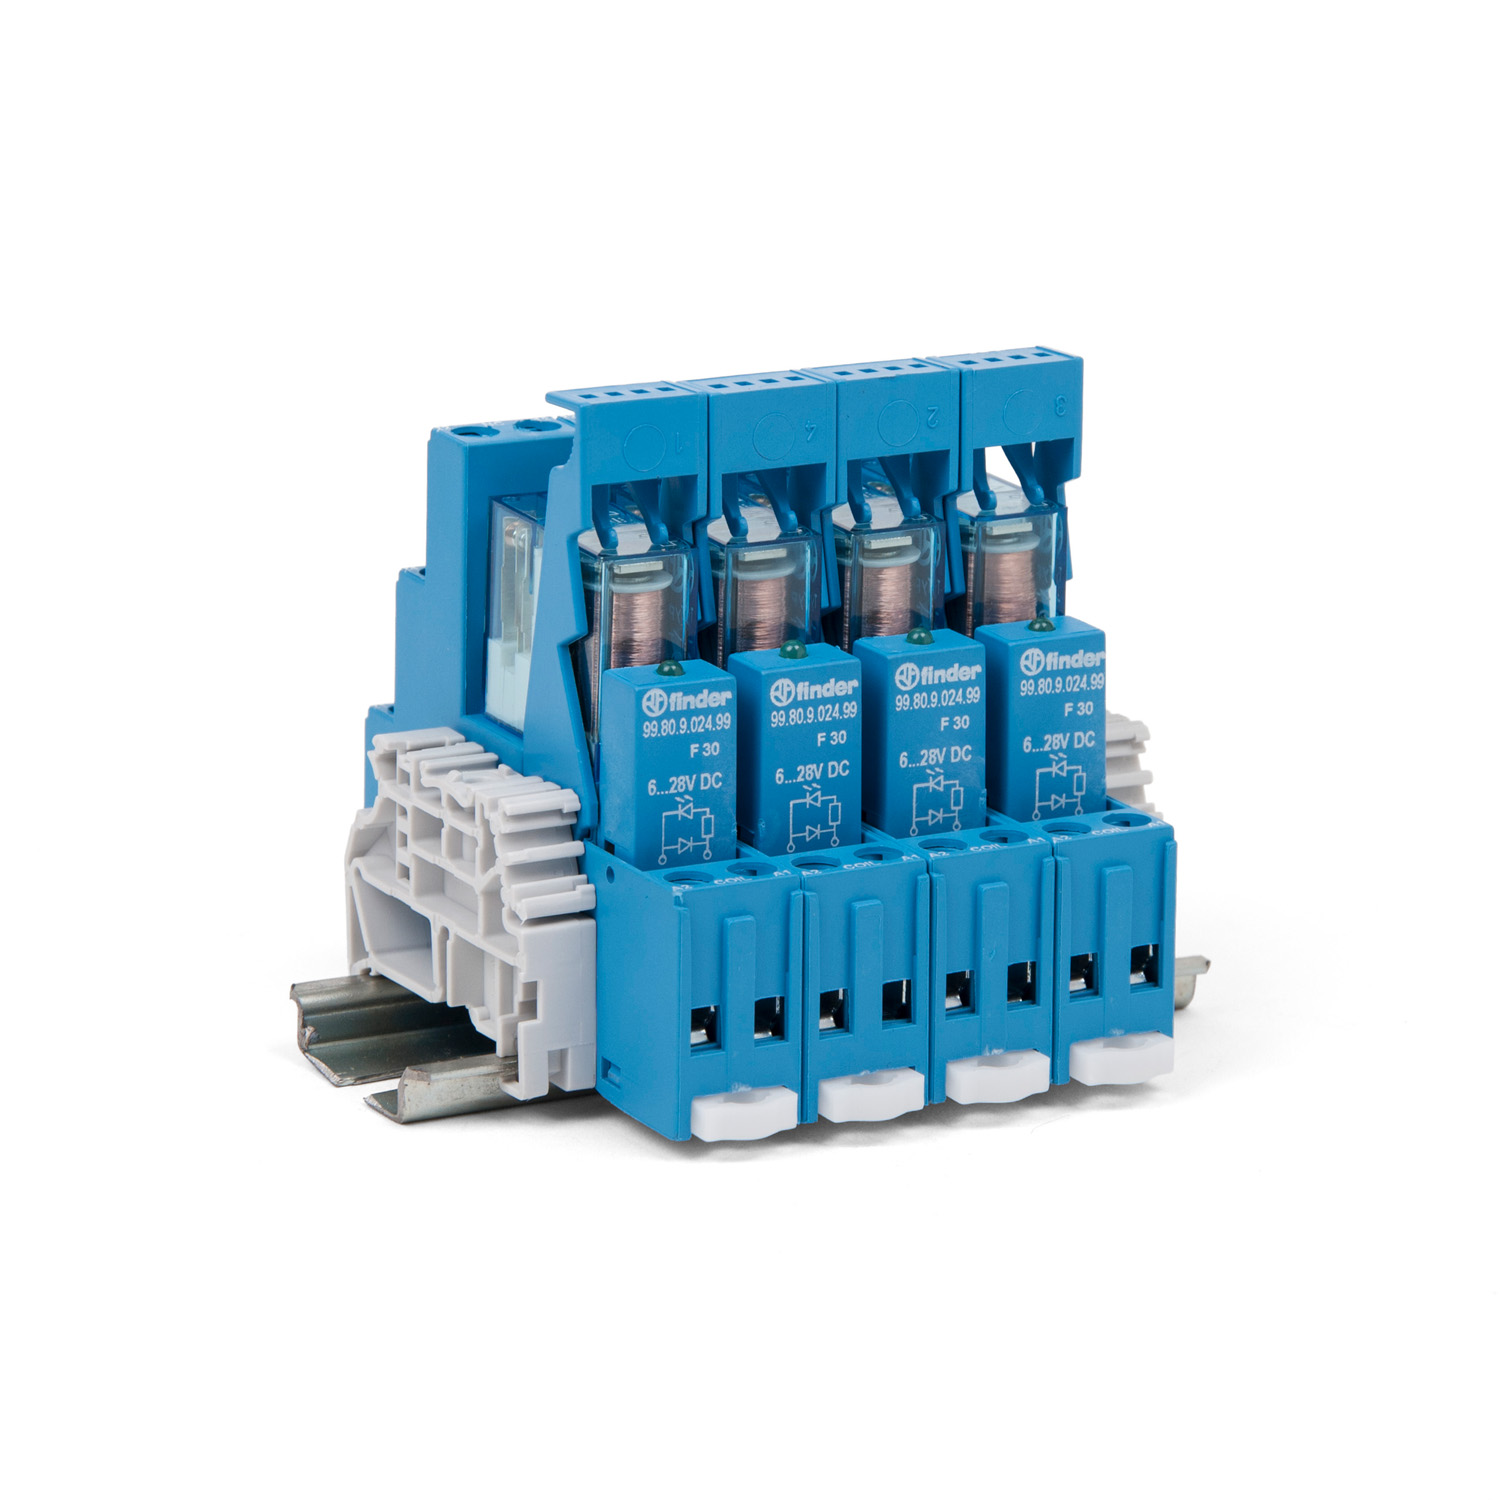 EFN-151-TERMINAL 4 coupling Relay with socket, on Dinrail